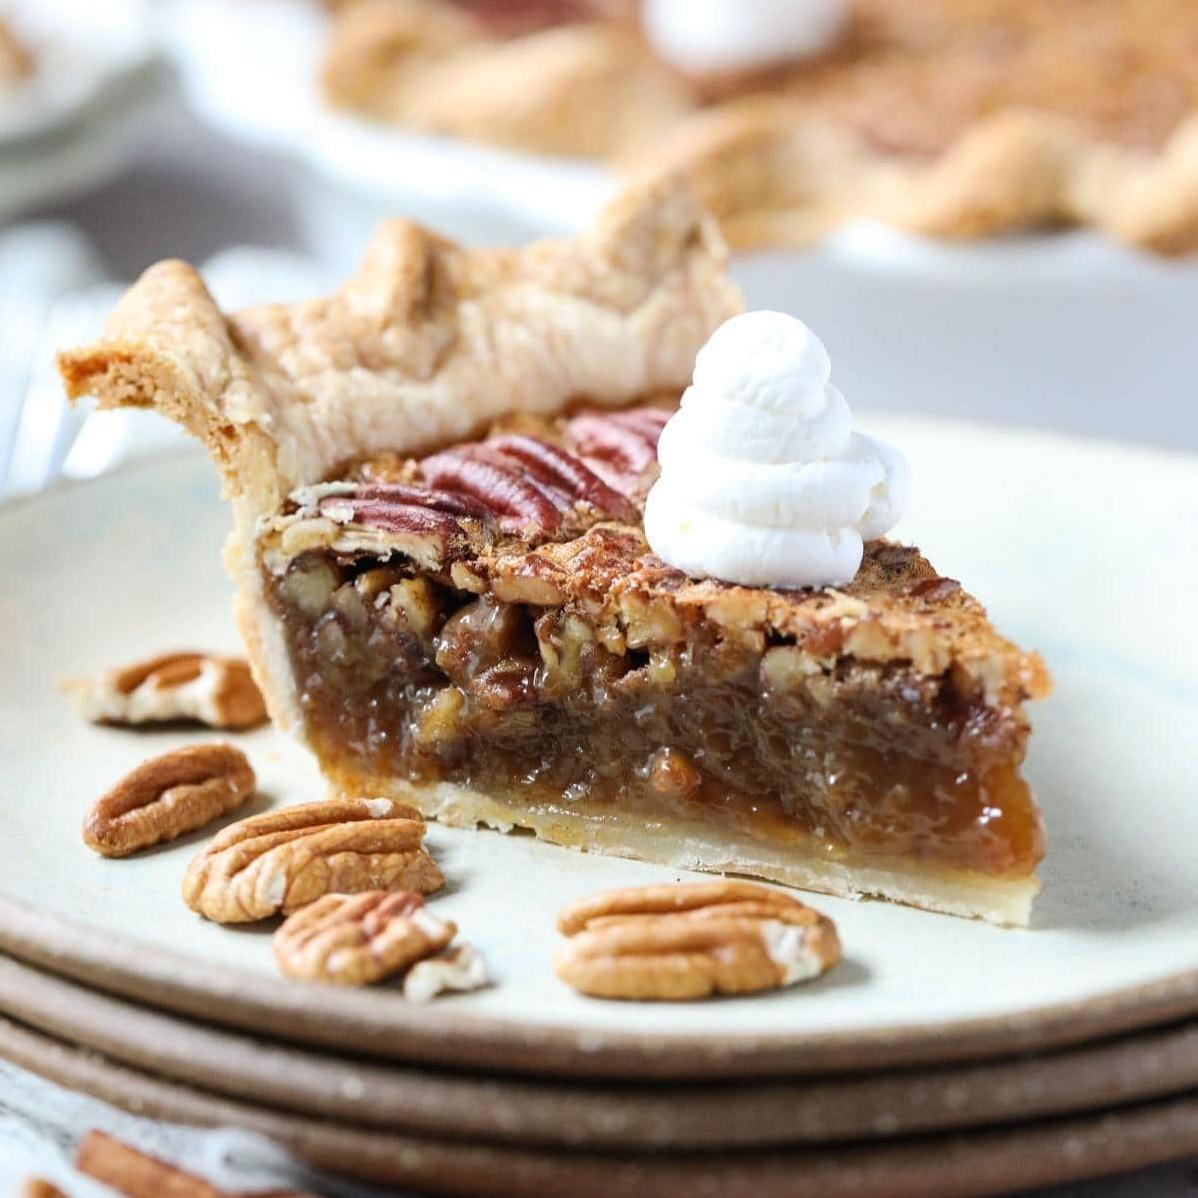  It's a great alternative to regular pie fillings, and it's easy to make too!